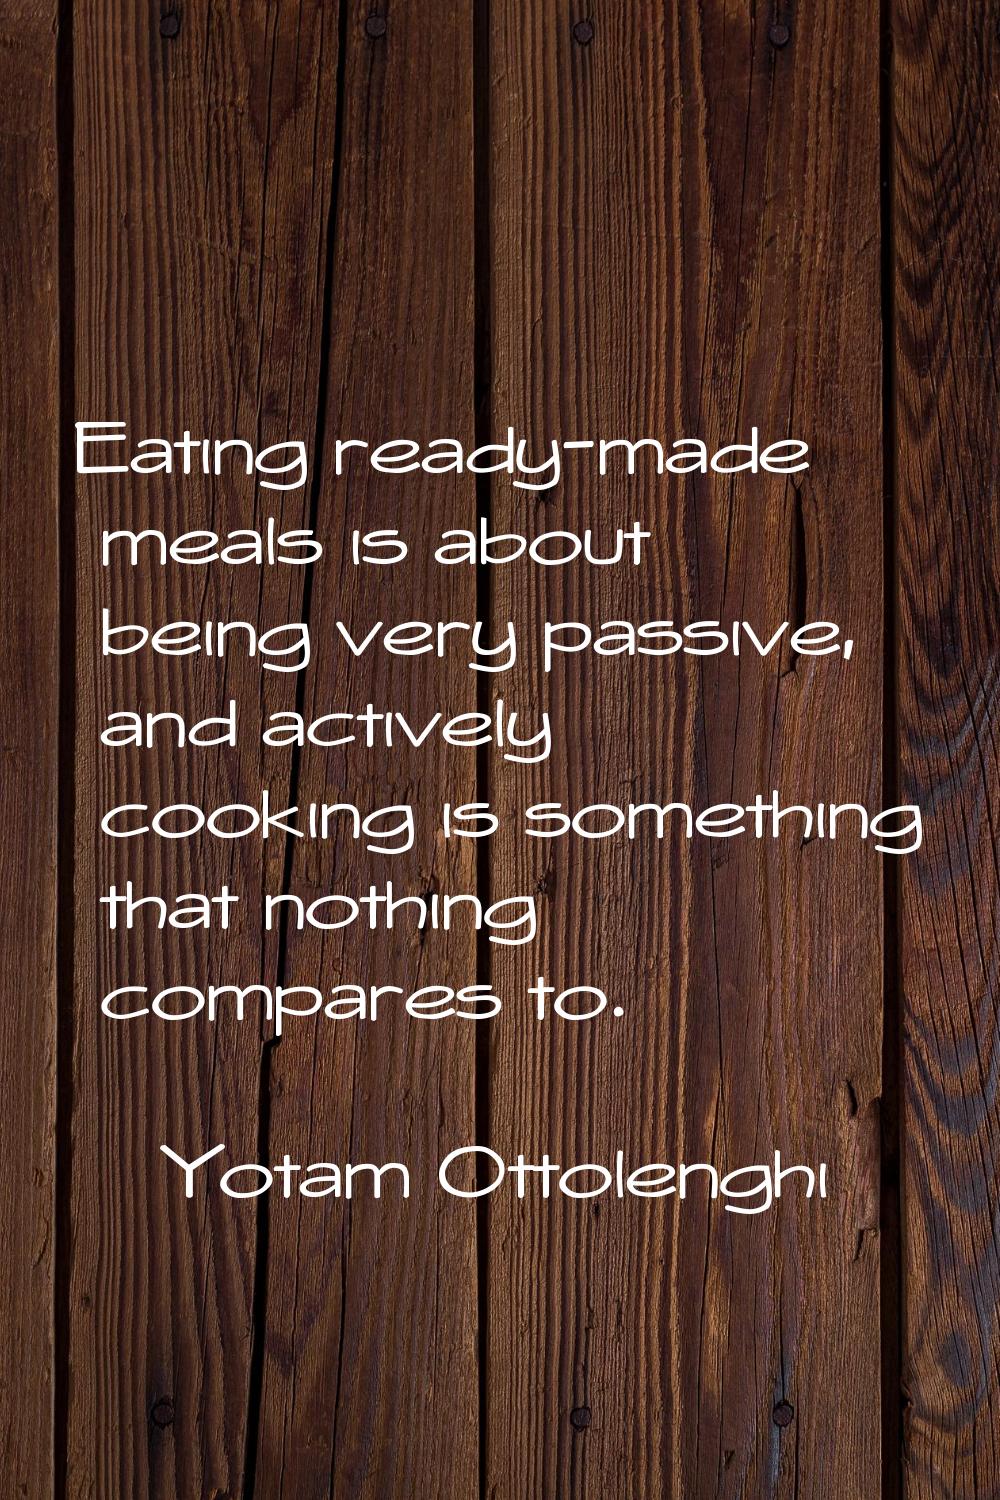 Eating ready-made meals is about being very passive, and actively cooking is something that nothing